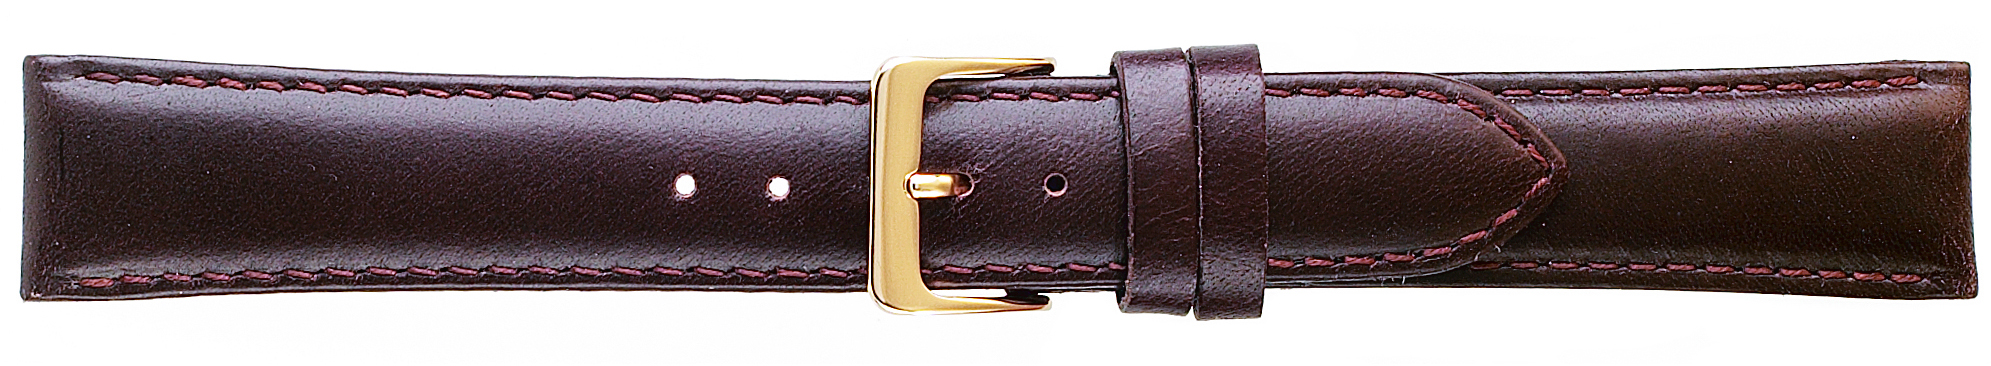 16MM Classic Oilskin Brown Leather Strap -0